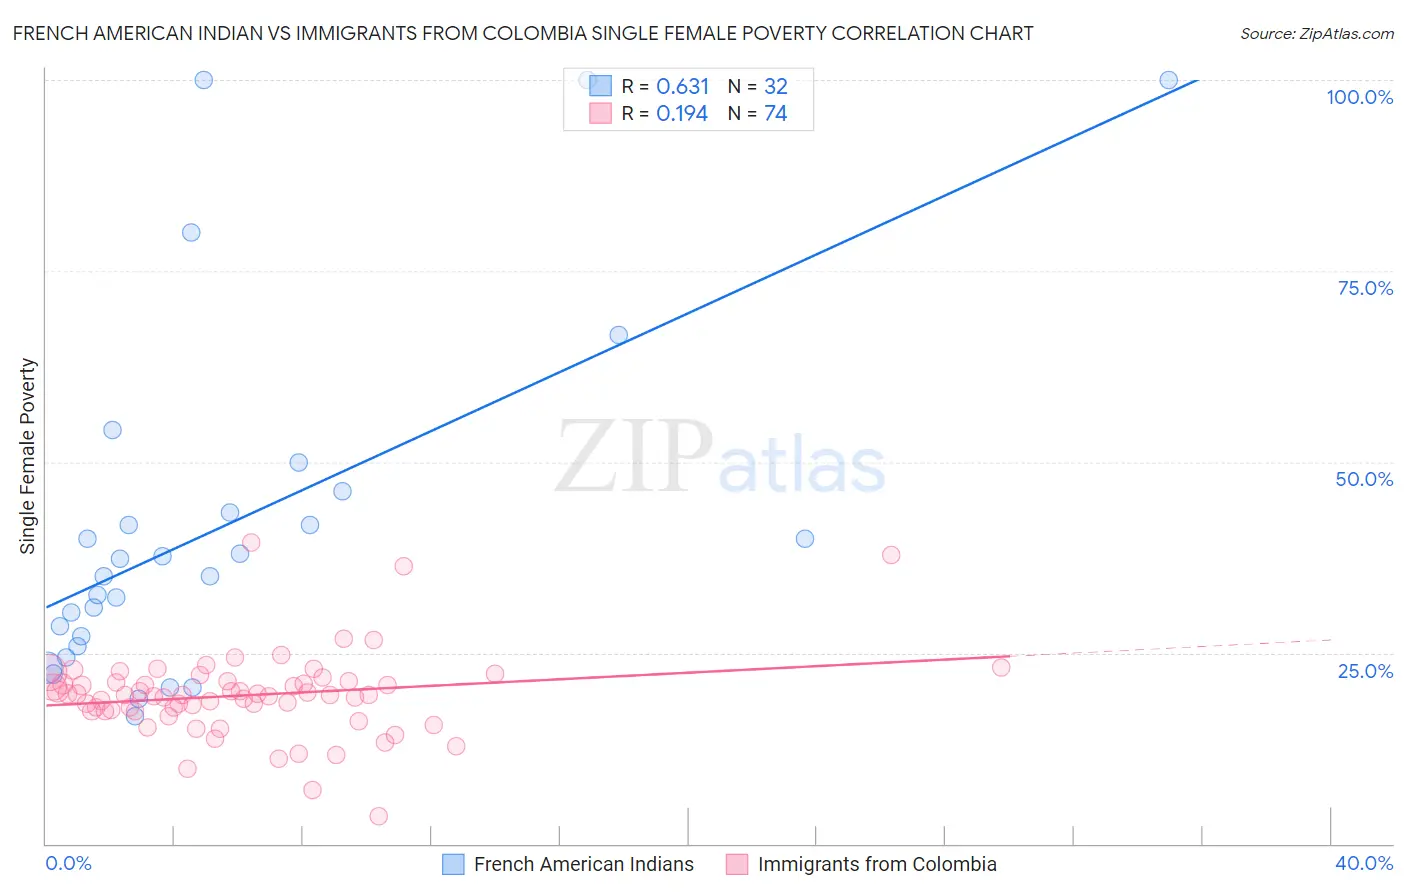 French American Indian vs Immigrants from Colombia Single Female Poverty